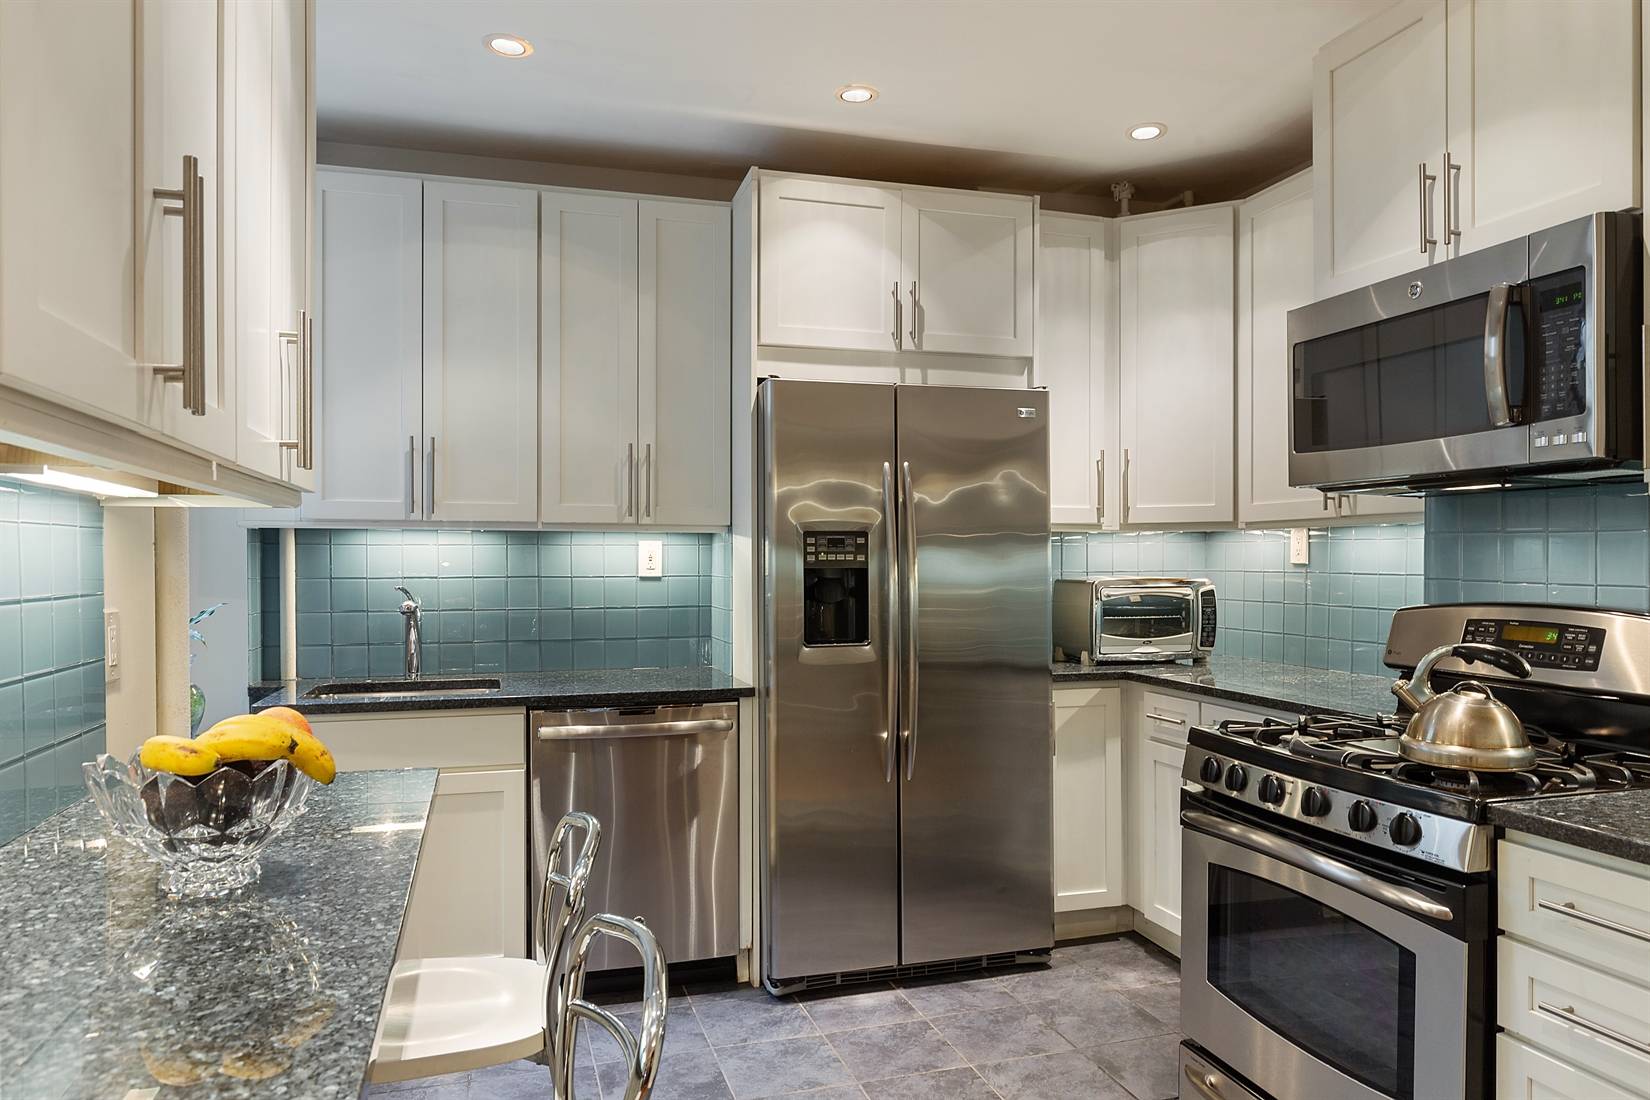 QUIET OASIS IN UPPER MANHATTAN PRICED TO SELL This magnificent rambling 6 room home offers an exciting amount of space and versatility for your ever changing needs.